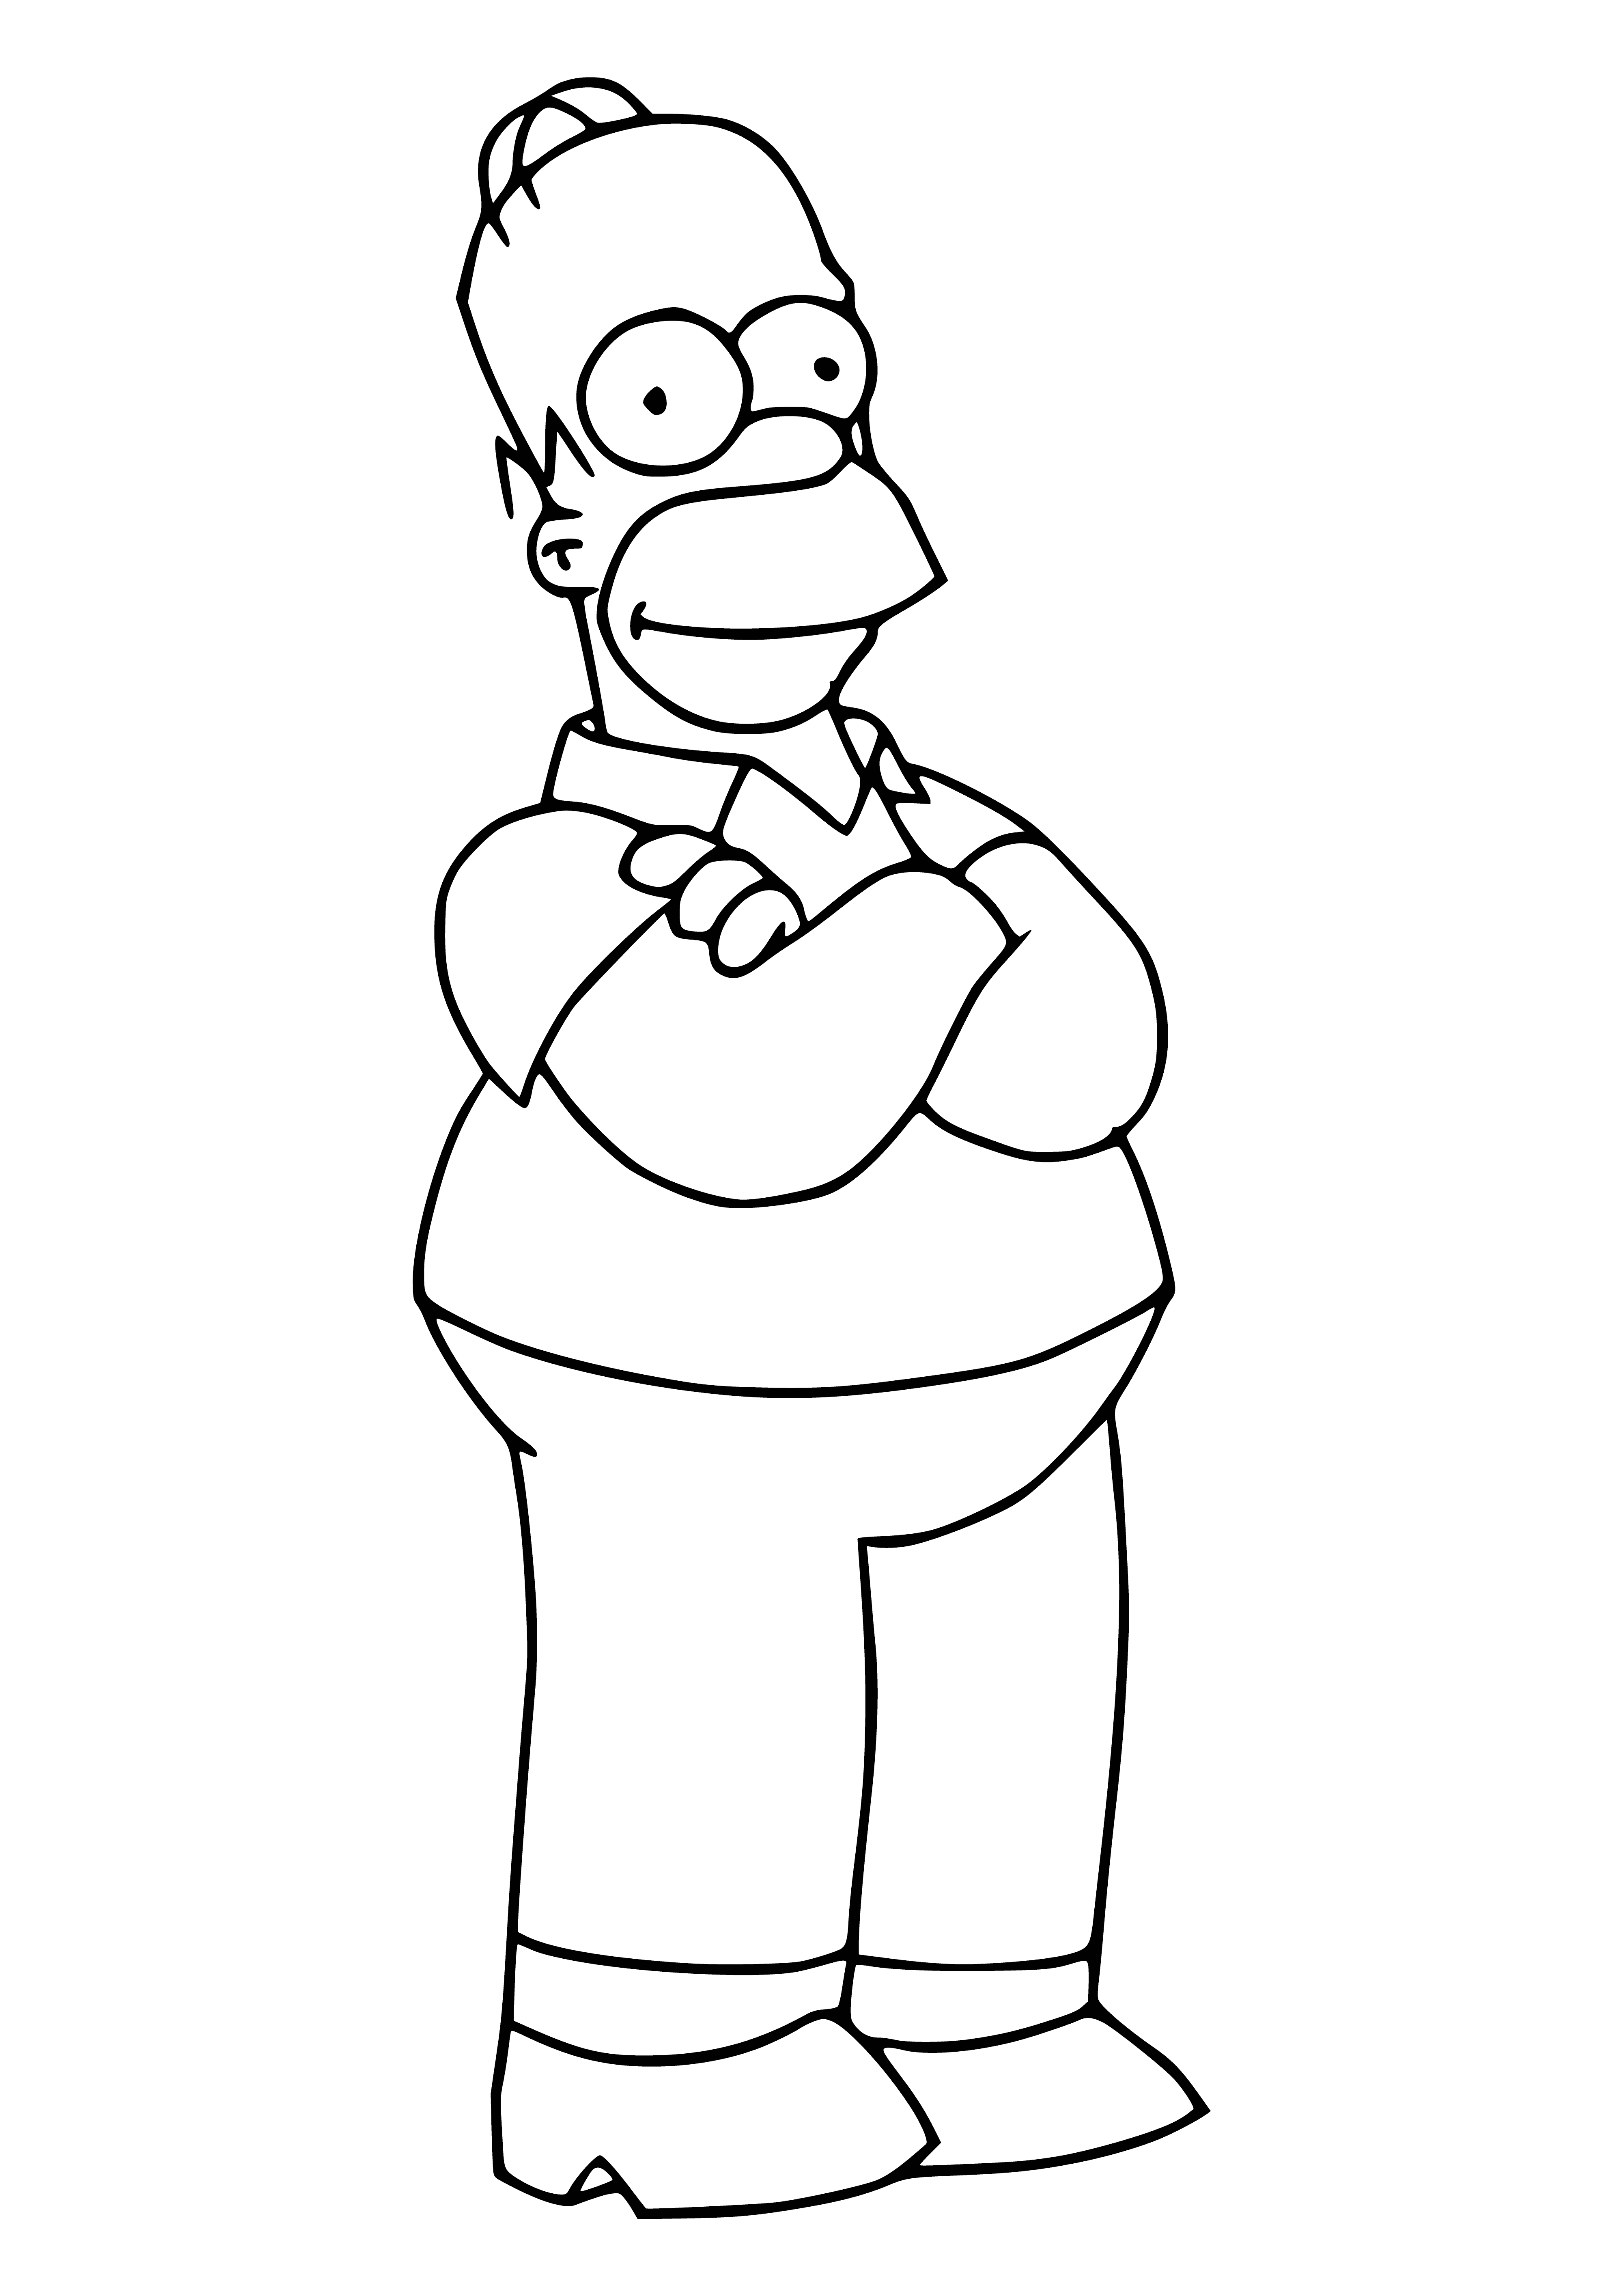 Homer Jay Simpson coloring page